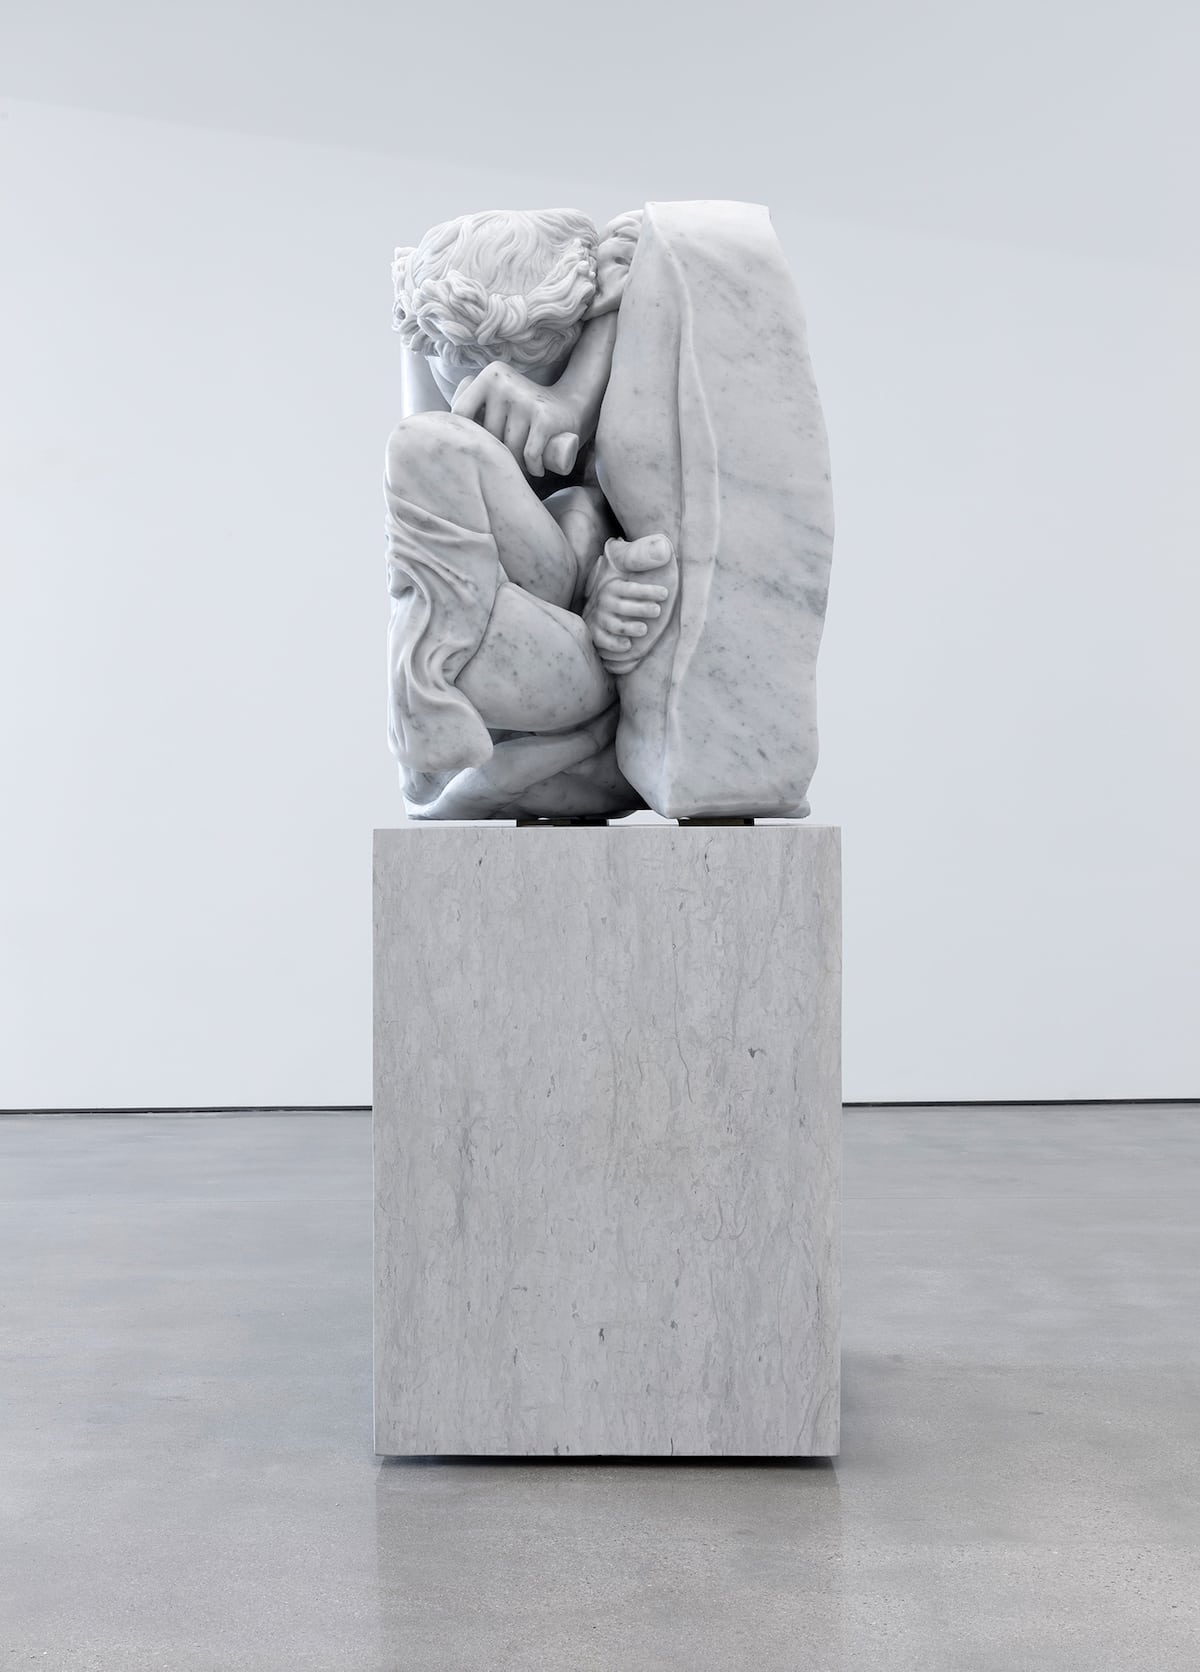 Artist Adam Parker Smith Compresses Classical Sculptures Into Small Marble Cubes (10)